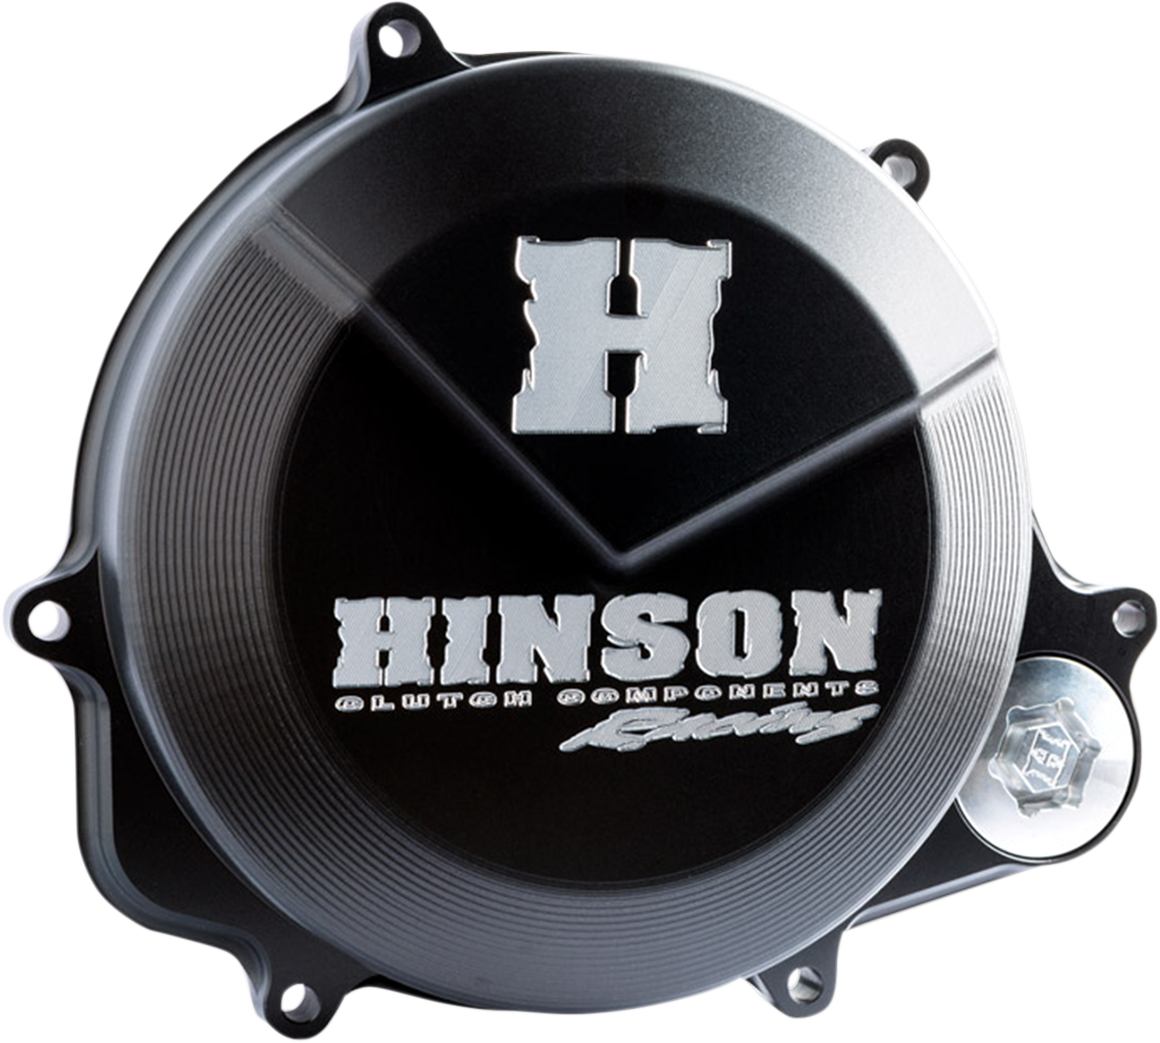 HINSON RACING Clutch Cover - CRF450R C789-0816